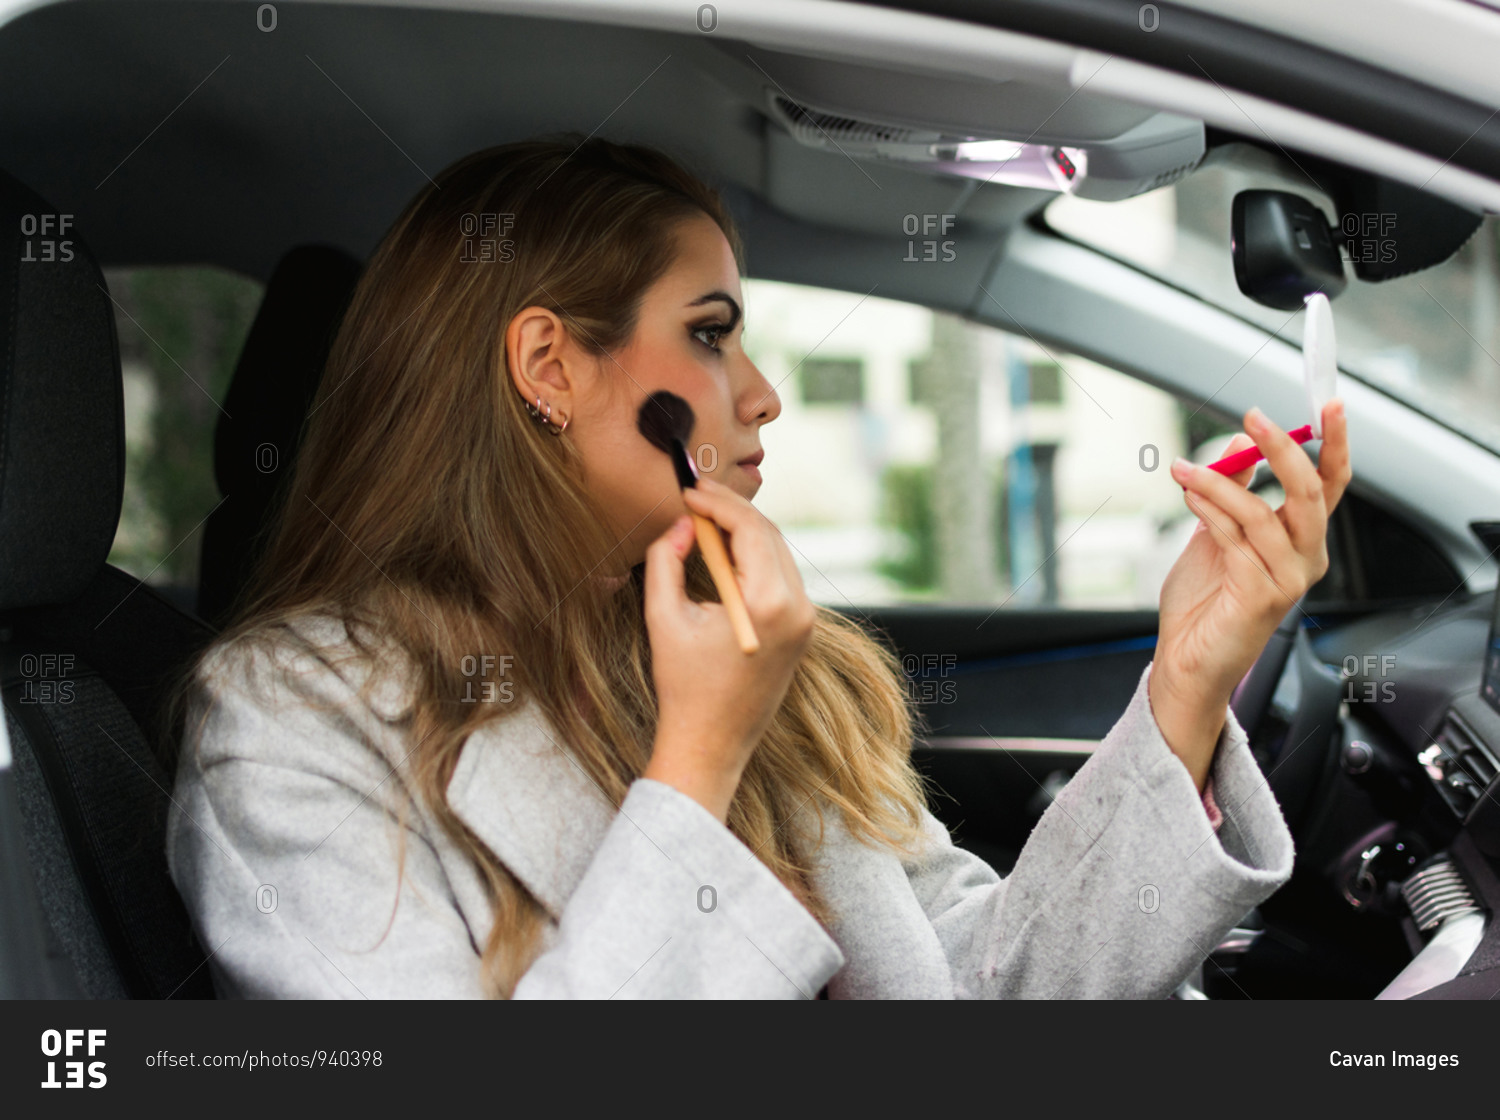 Young woman puts on makeup inside a car